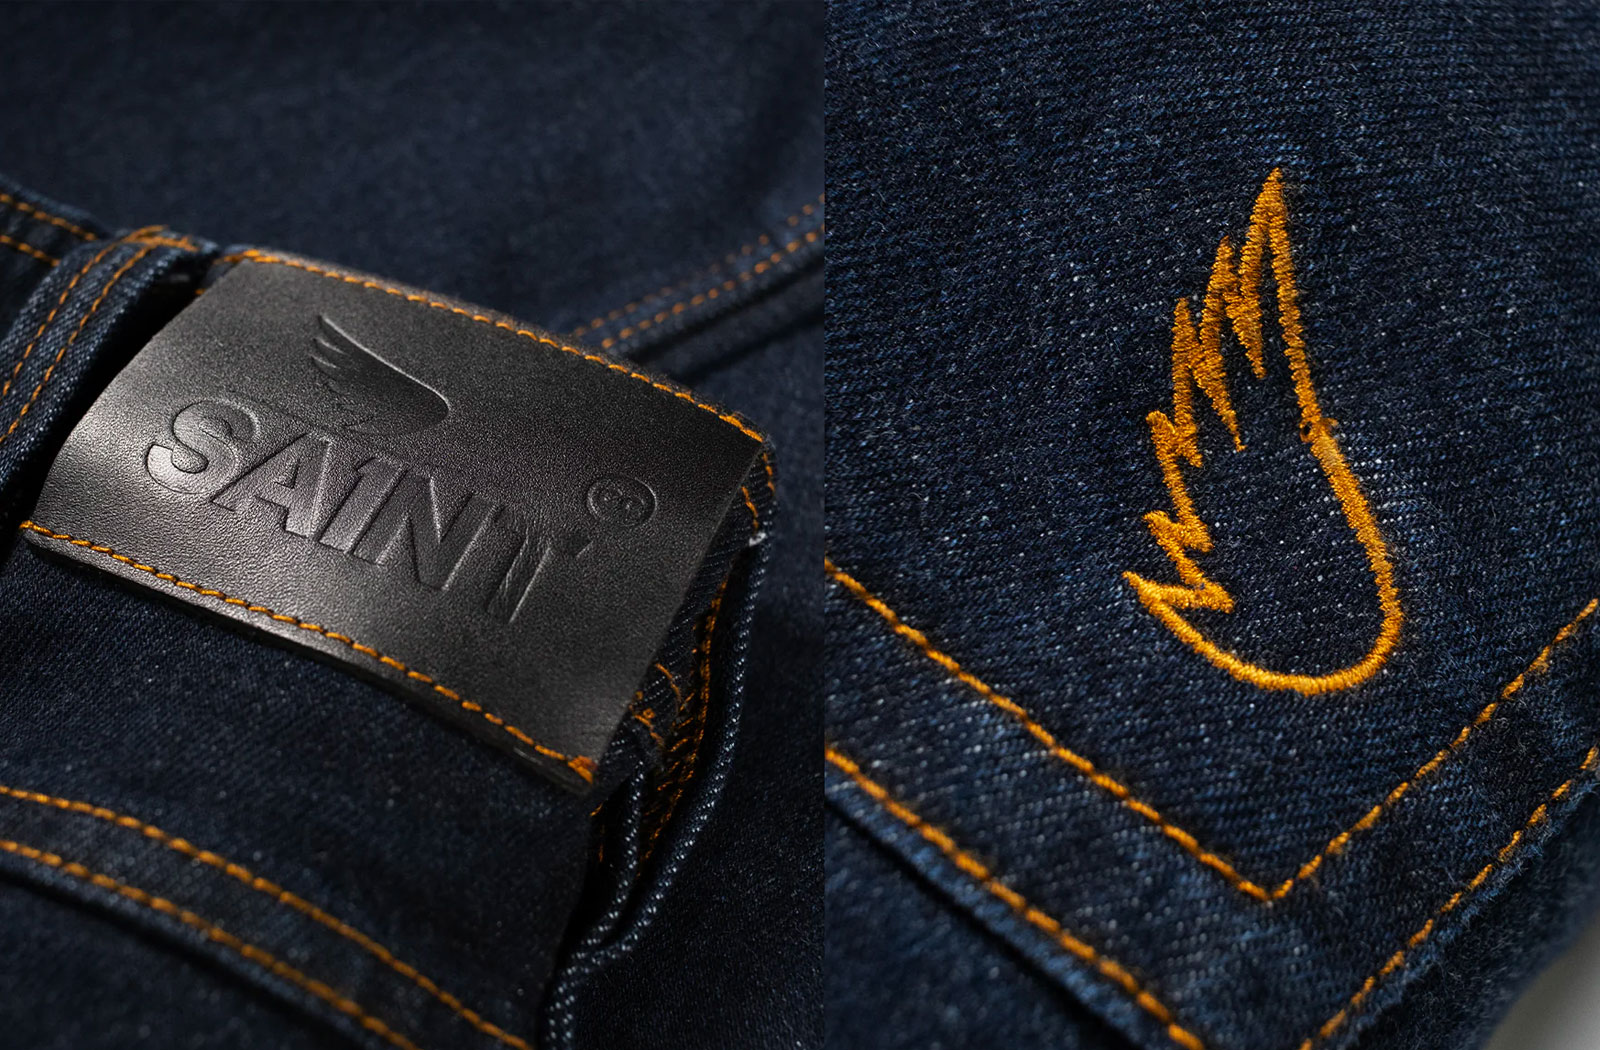 Saint Force Armoured Jeans review